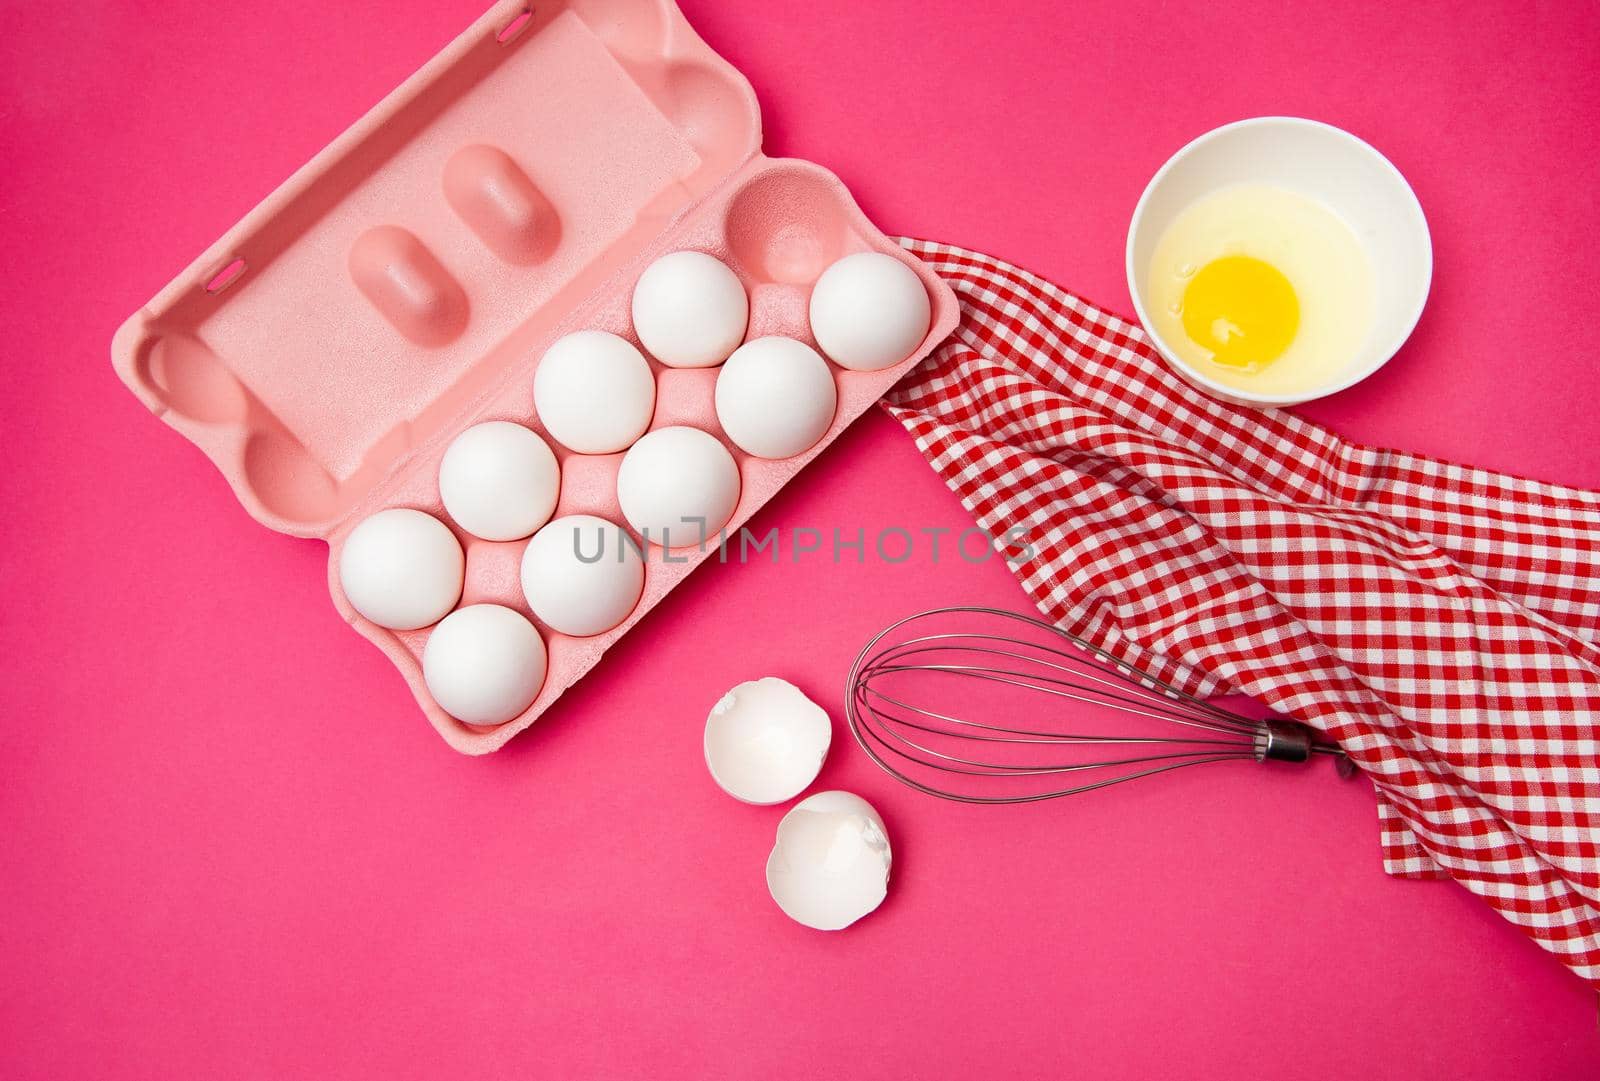 Top view of yolk in bowl placed on pink surface with box of fresh whole eggs near checkered towel and metal hand whisk